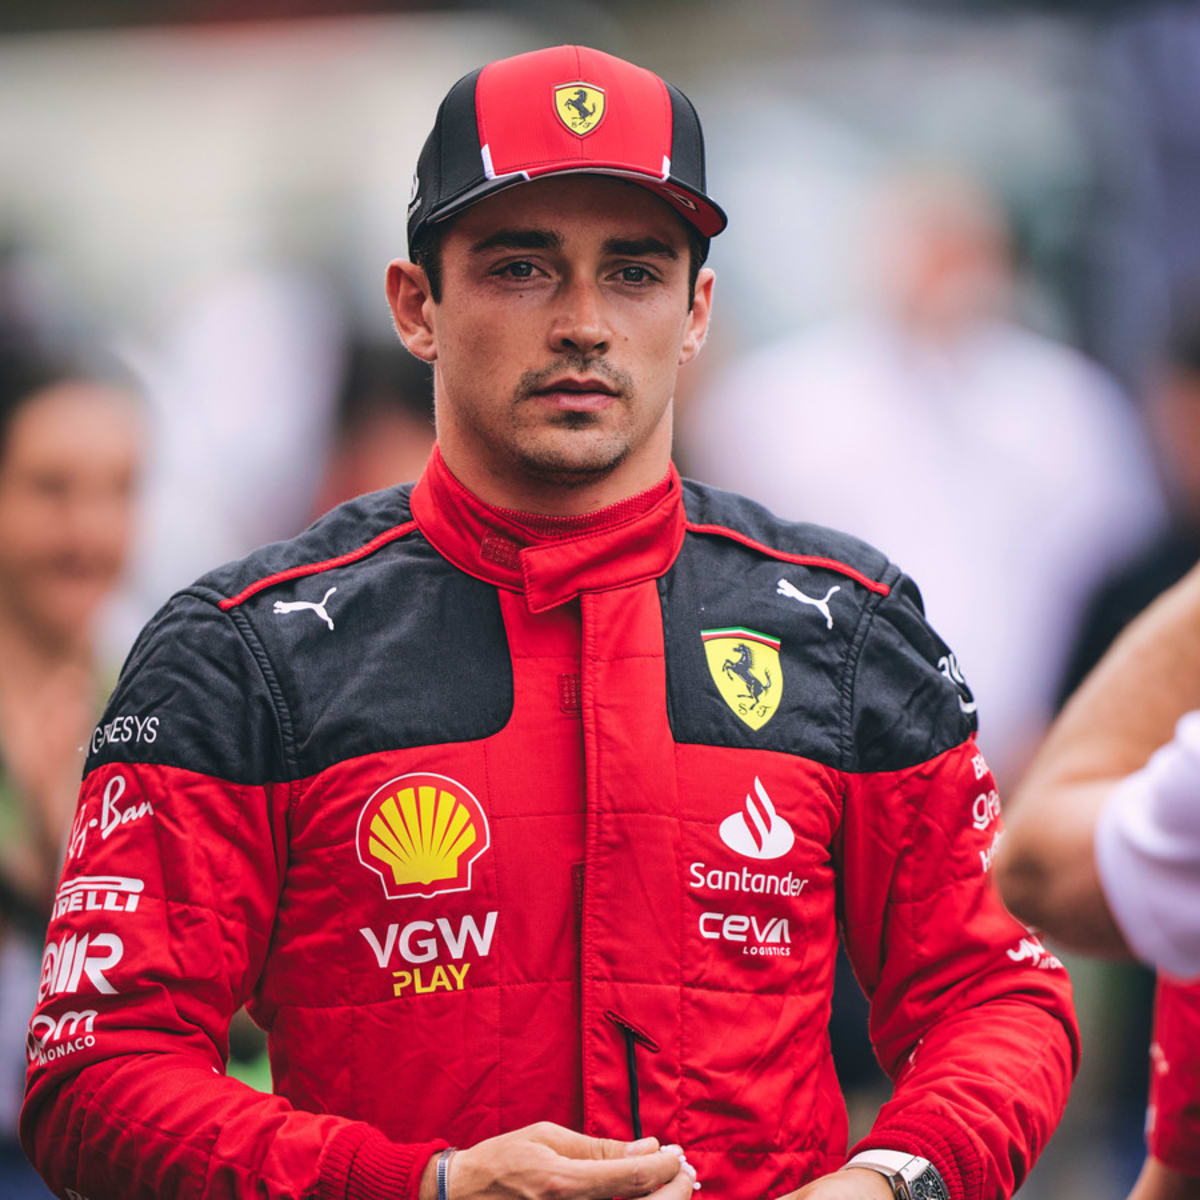 F1 News Charles Leclercs Mega Payday Audi Option Could Be A Risky Move Away From Ferrari